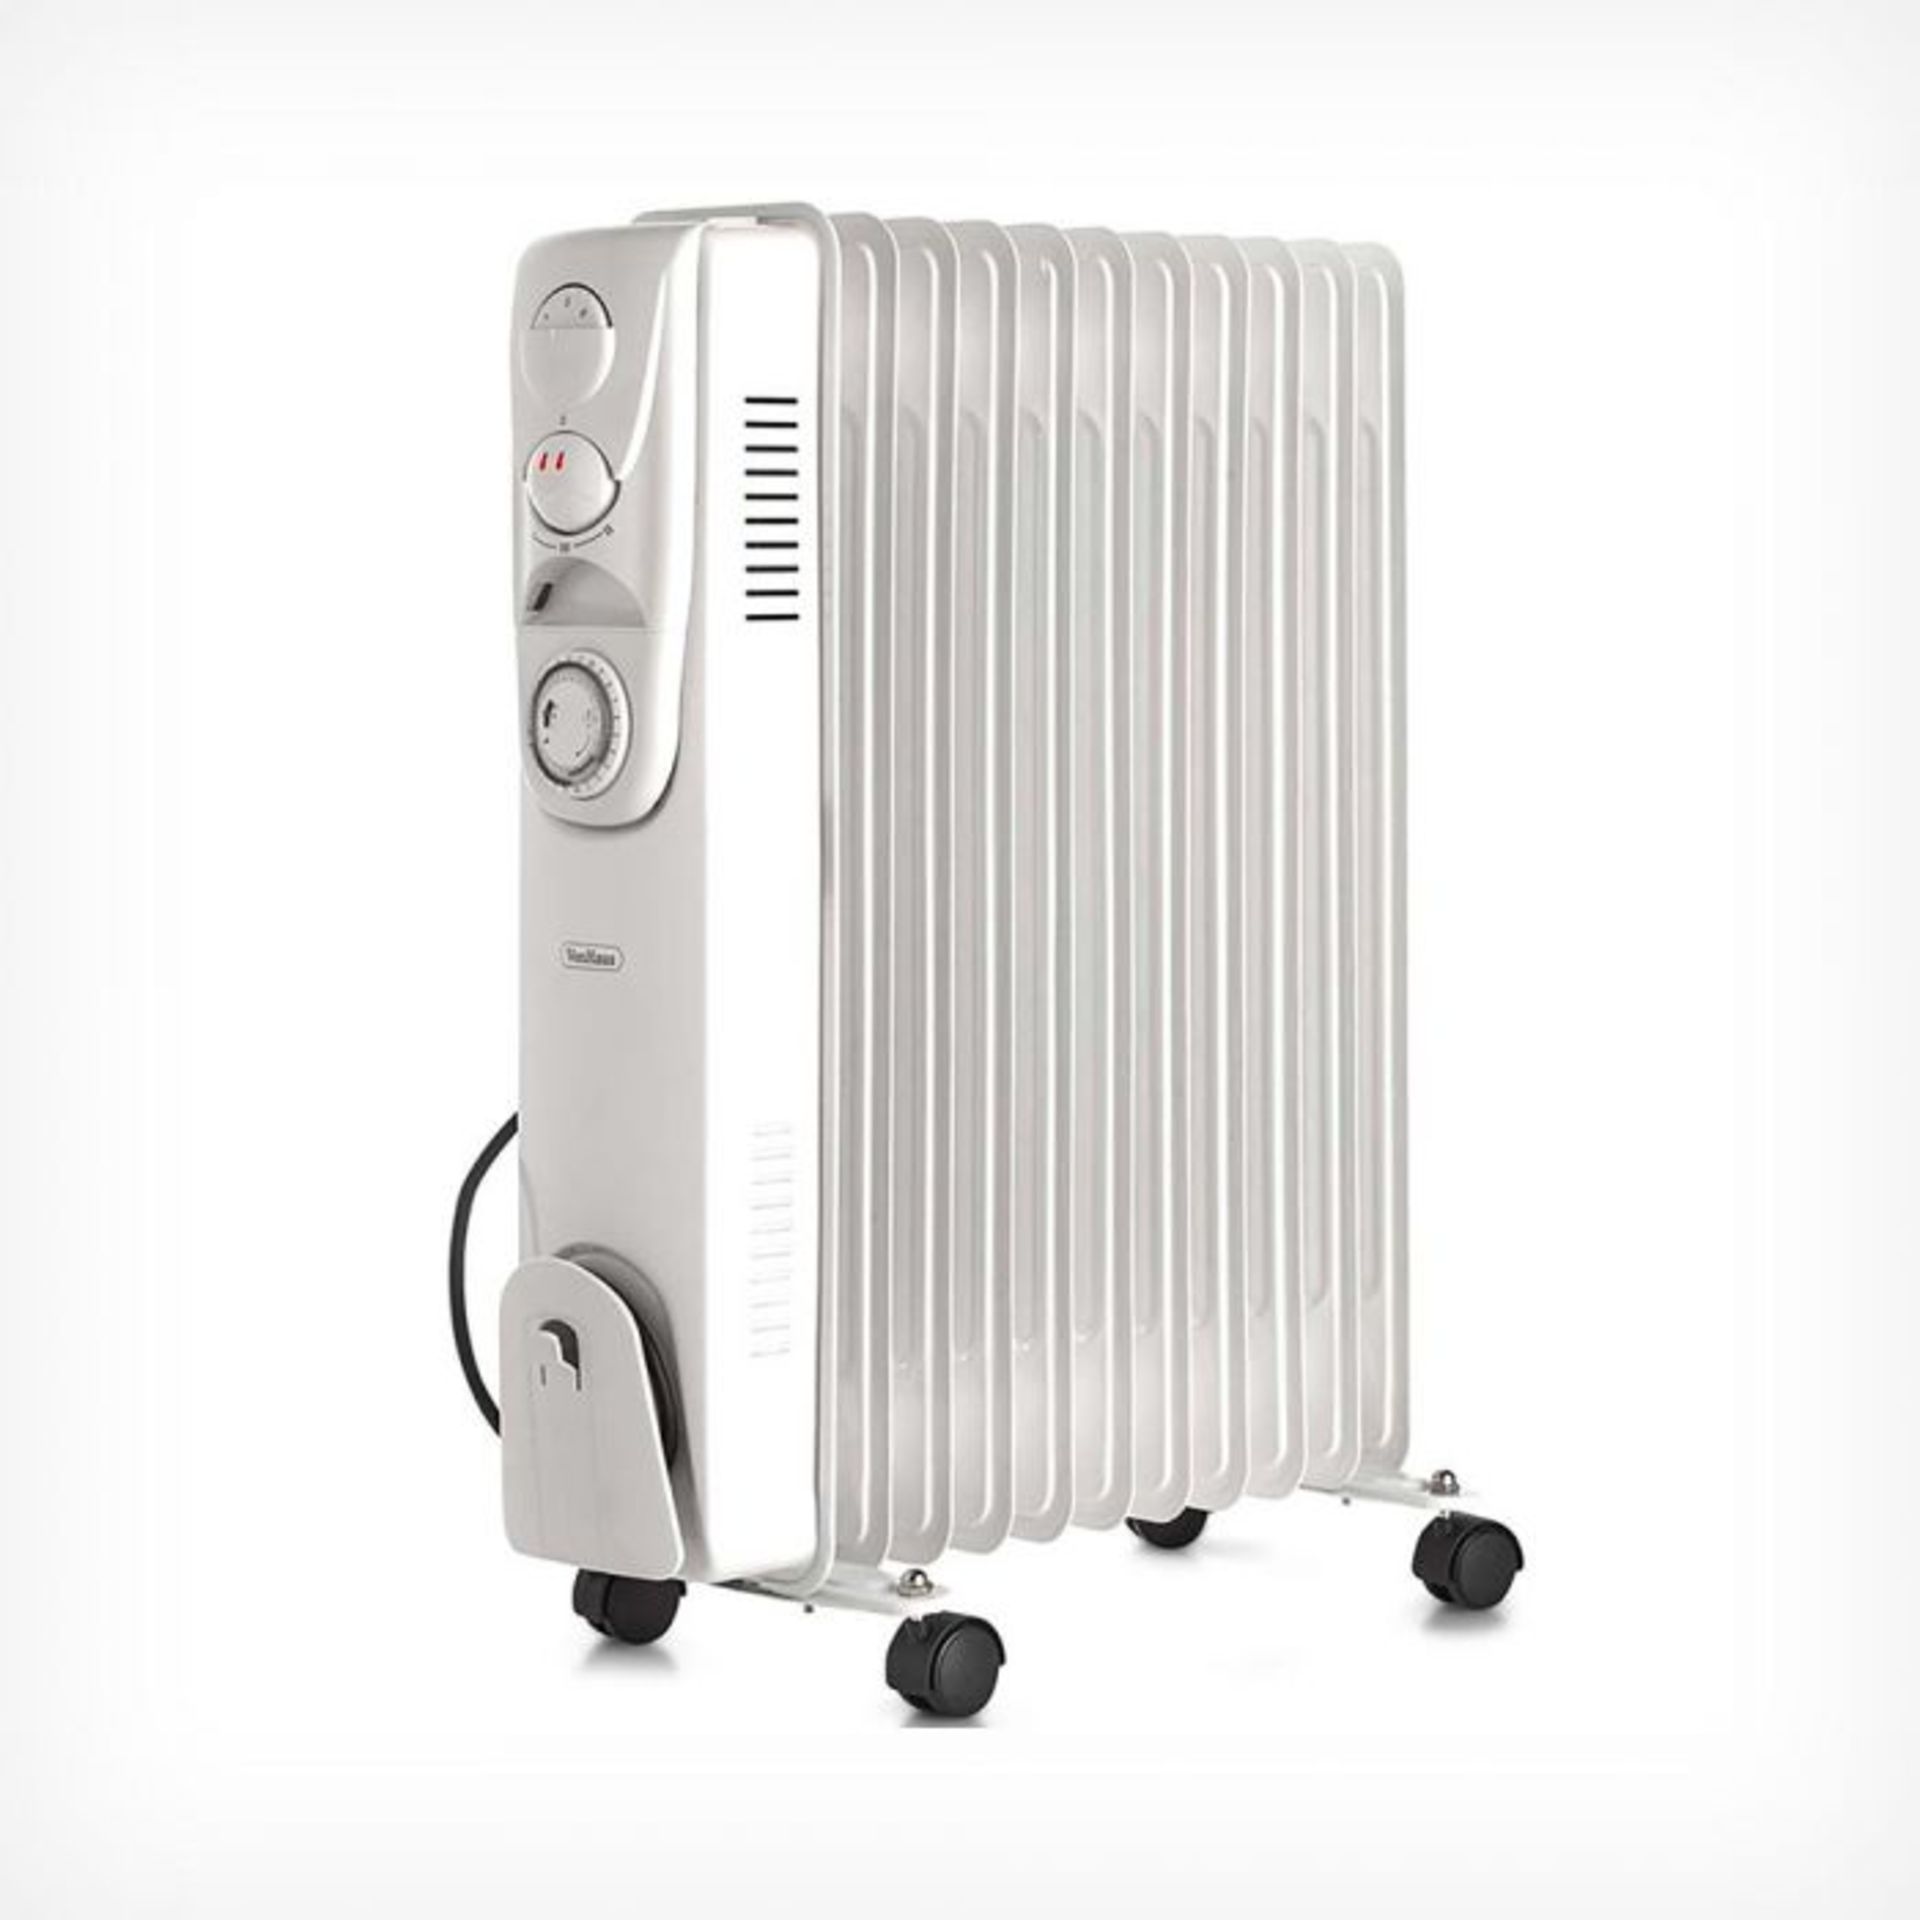 (V62) 11 Fin 2500W Oil Filled Radiator - White Suitable for areas up to 28 square metres 3 po... - Image 2 of 3